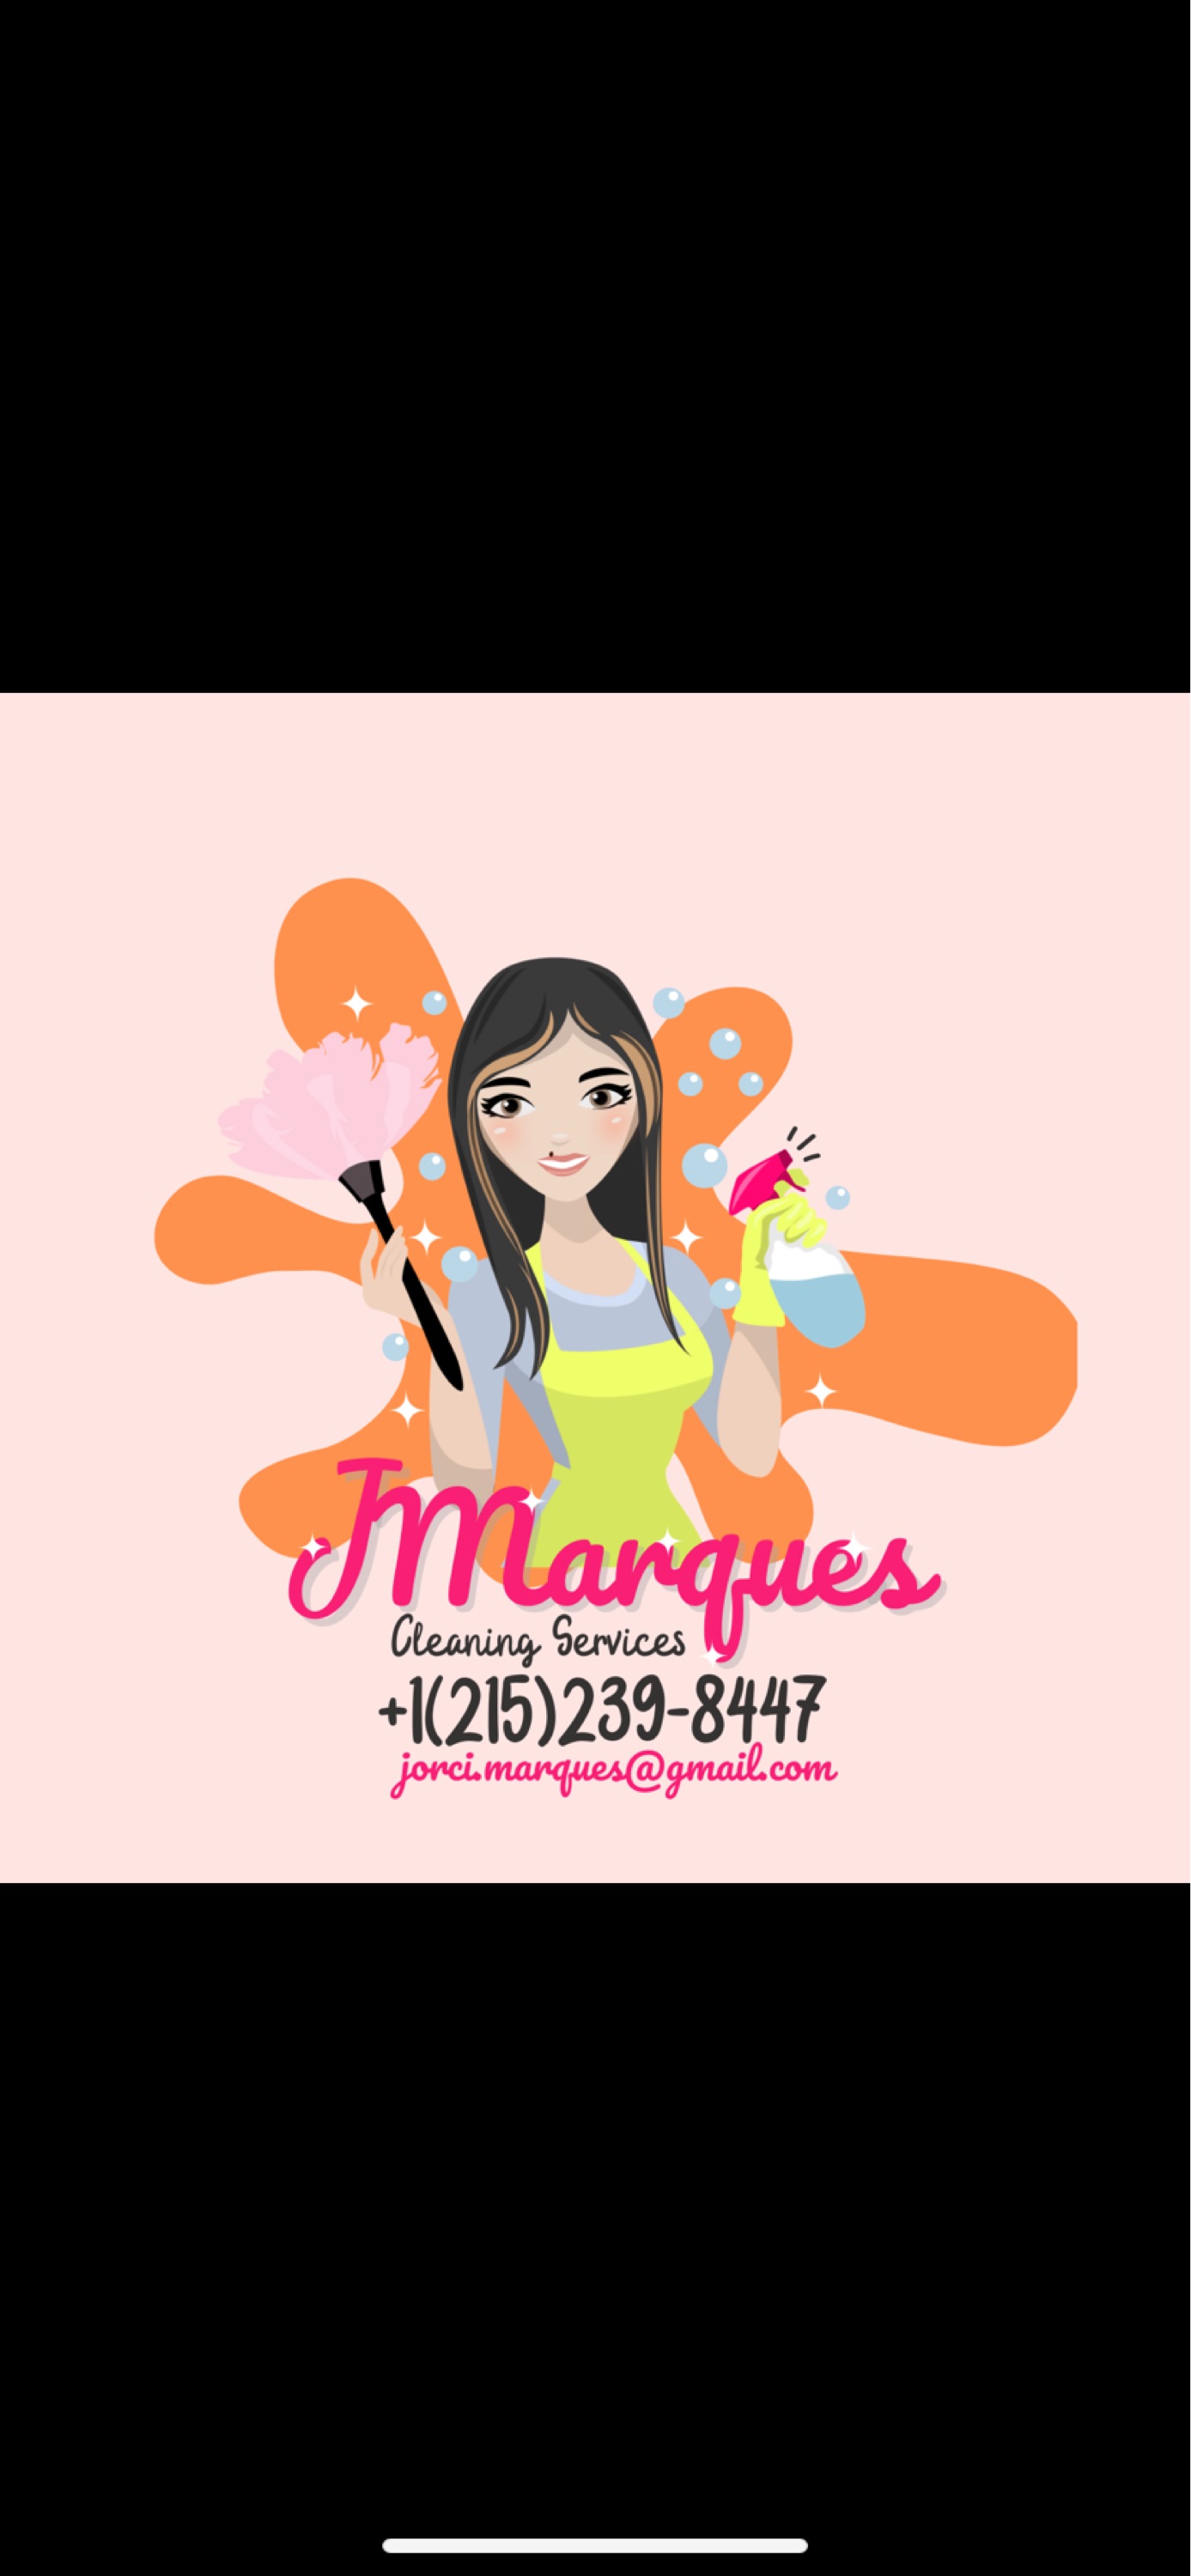 J Marques Cleaning Services Logo